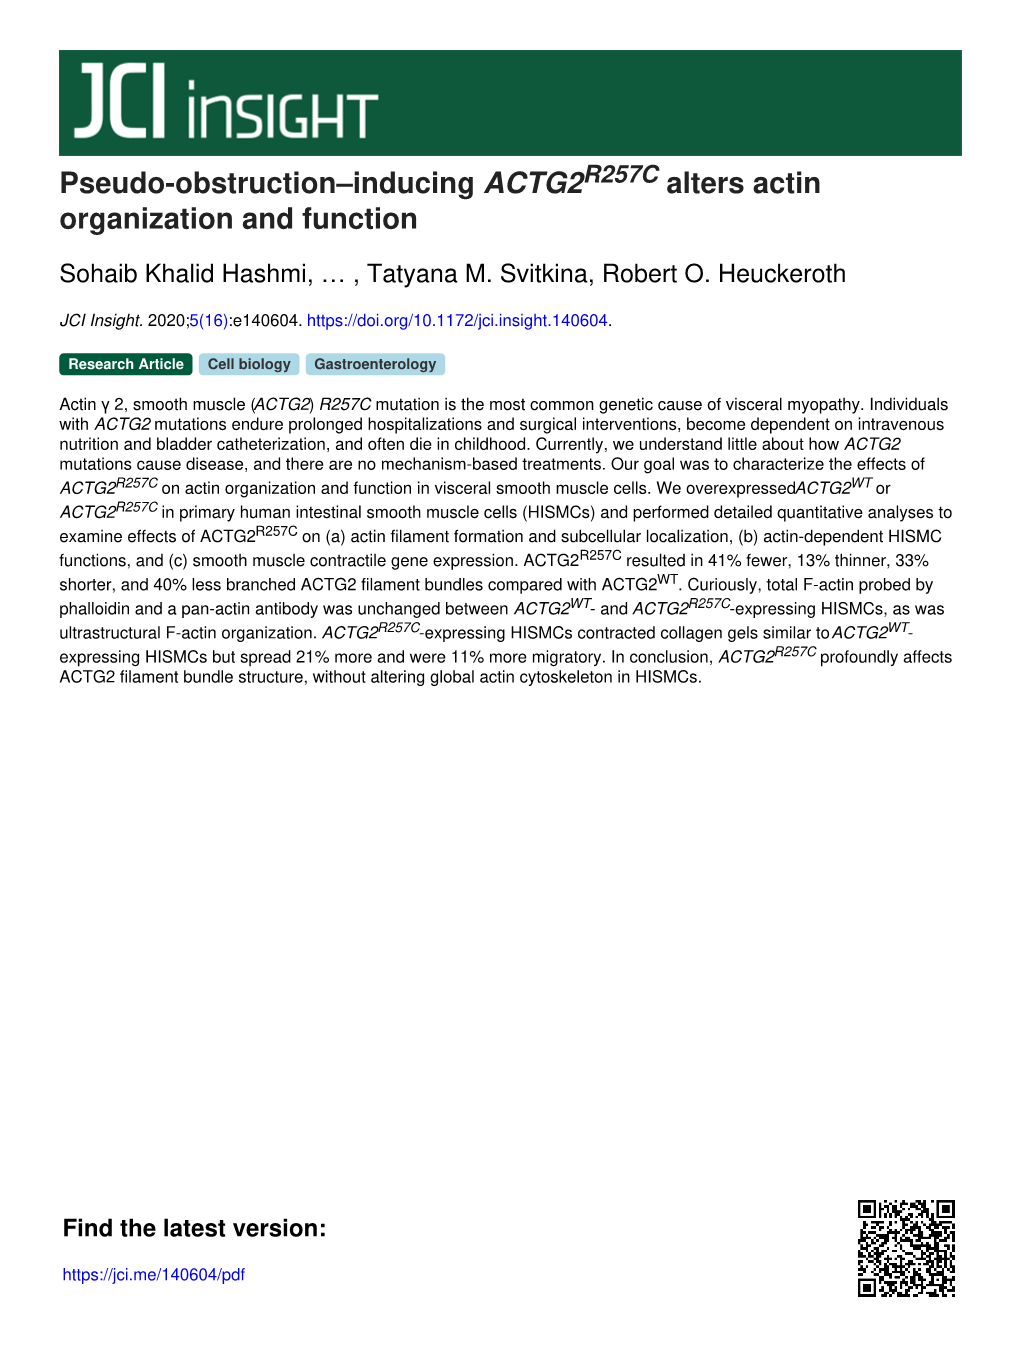 Pseudo-Obstruction–Inducing ACTG2 Alters Actin Organization and Function